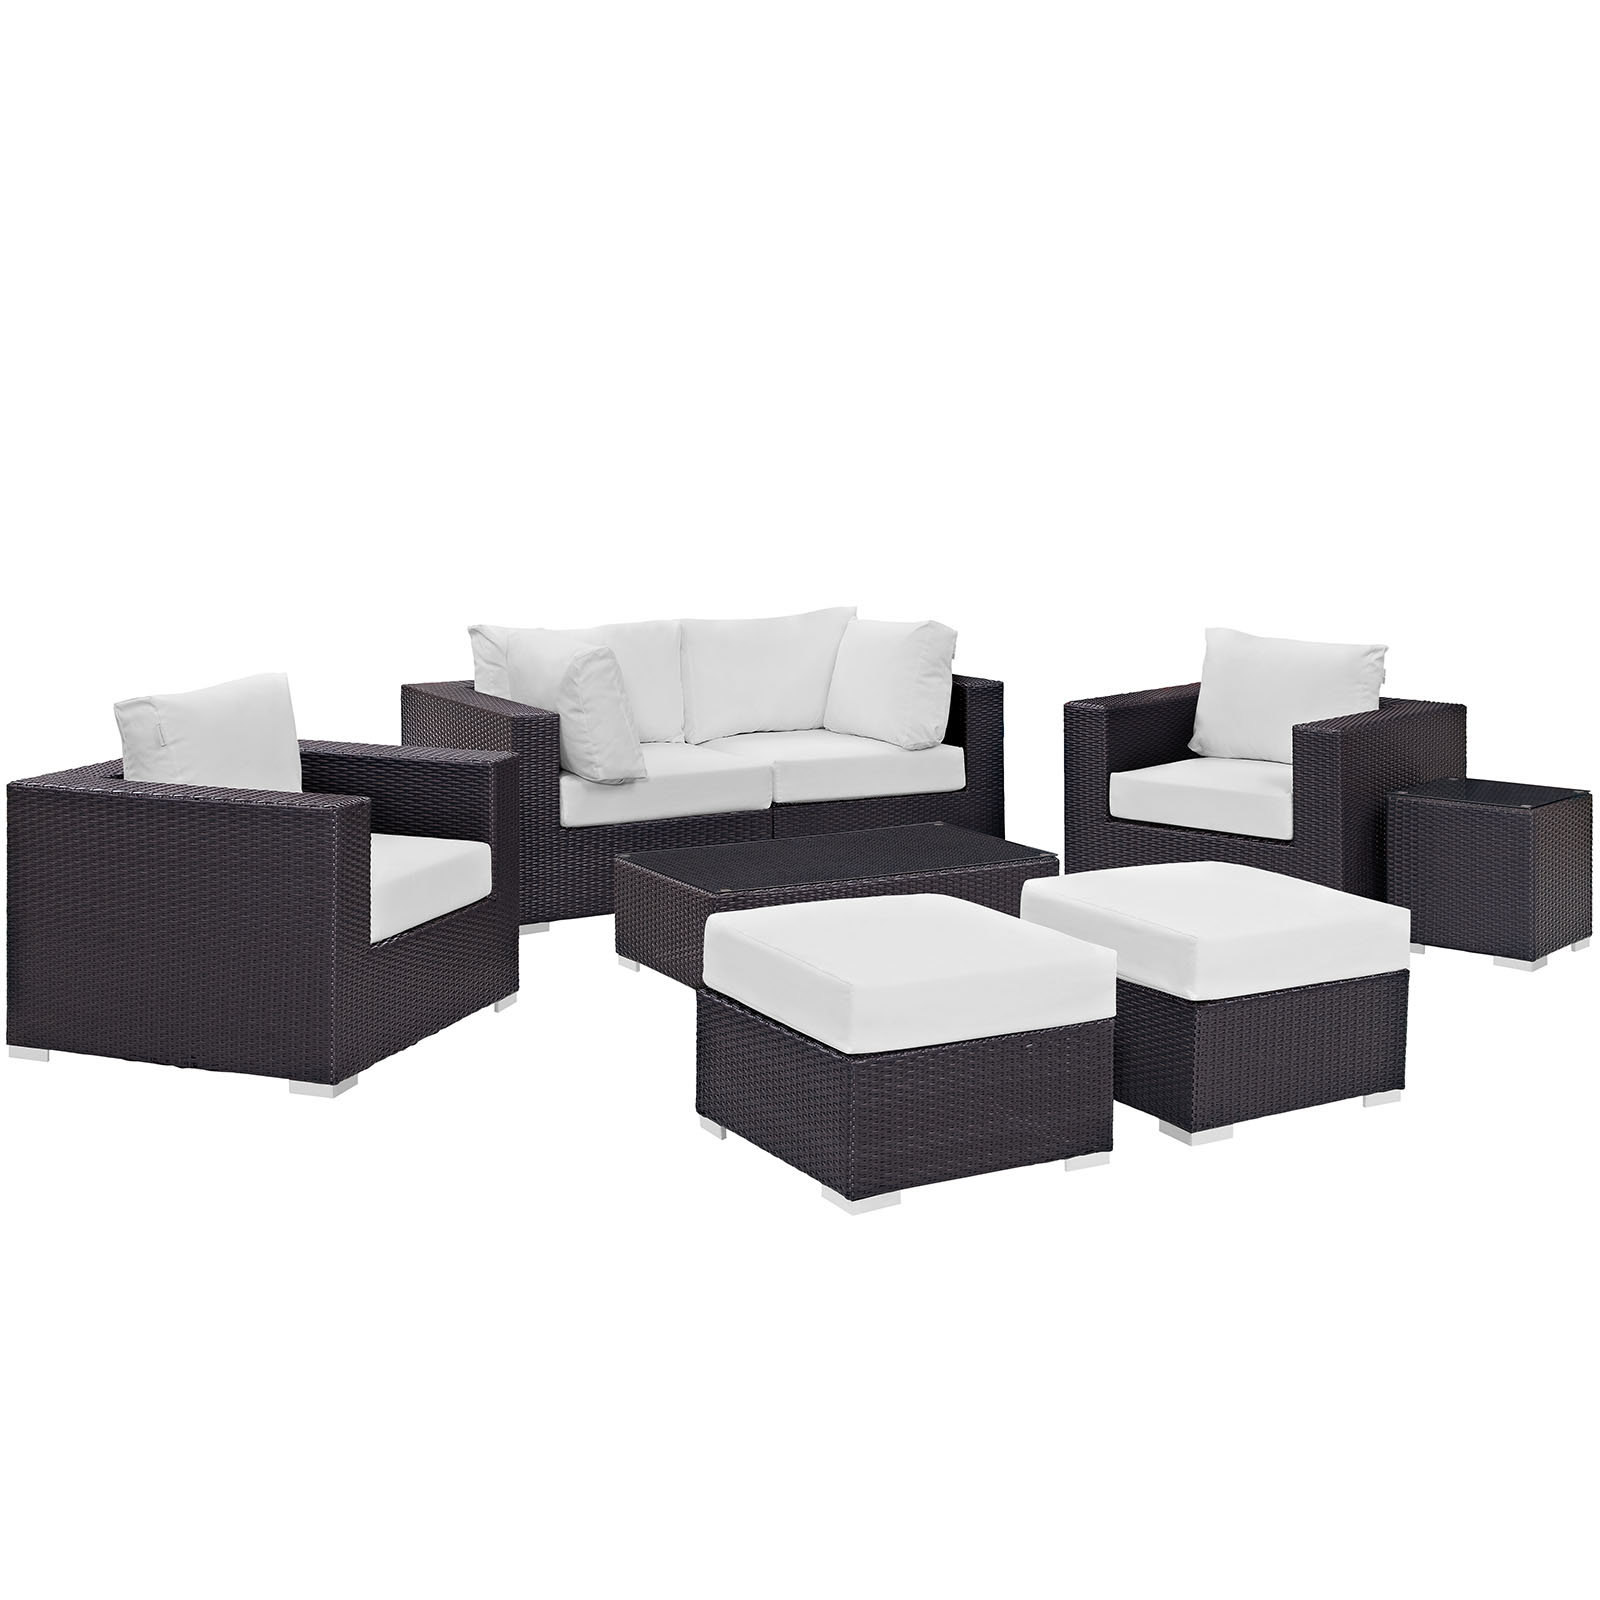 Modway Convene 8 Piece Outdoor Patio Sectional Set in Espresso White - image 3 of 11